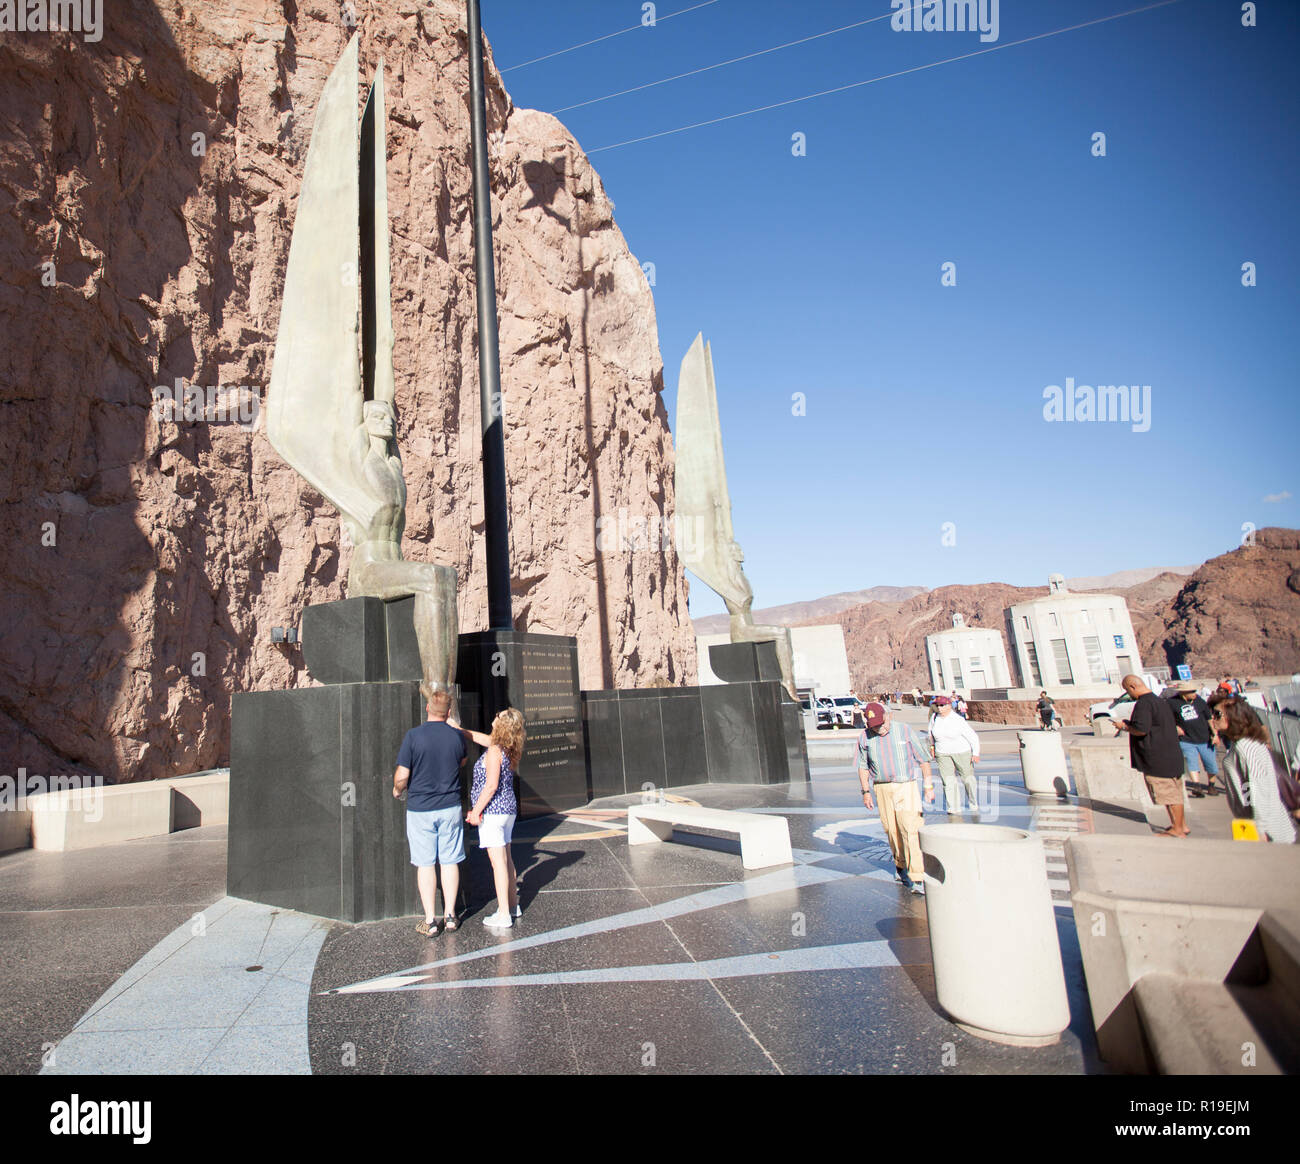 Two soaring figures flank a 142-foot flagpole at the Hoover Dam Visitors Center, aged to the verdigris patina that clings to bronze after years in the Stock Photo